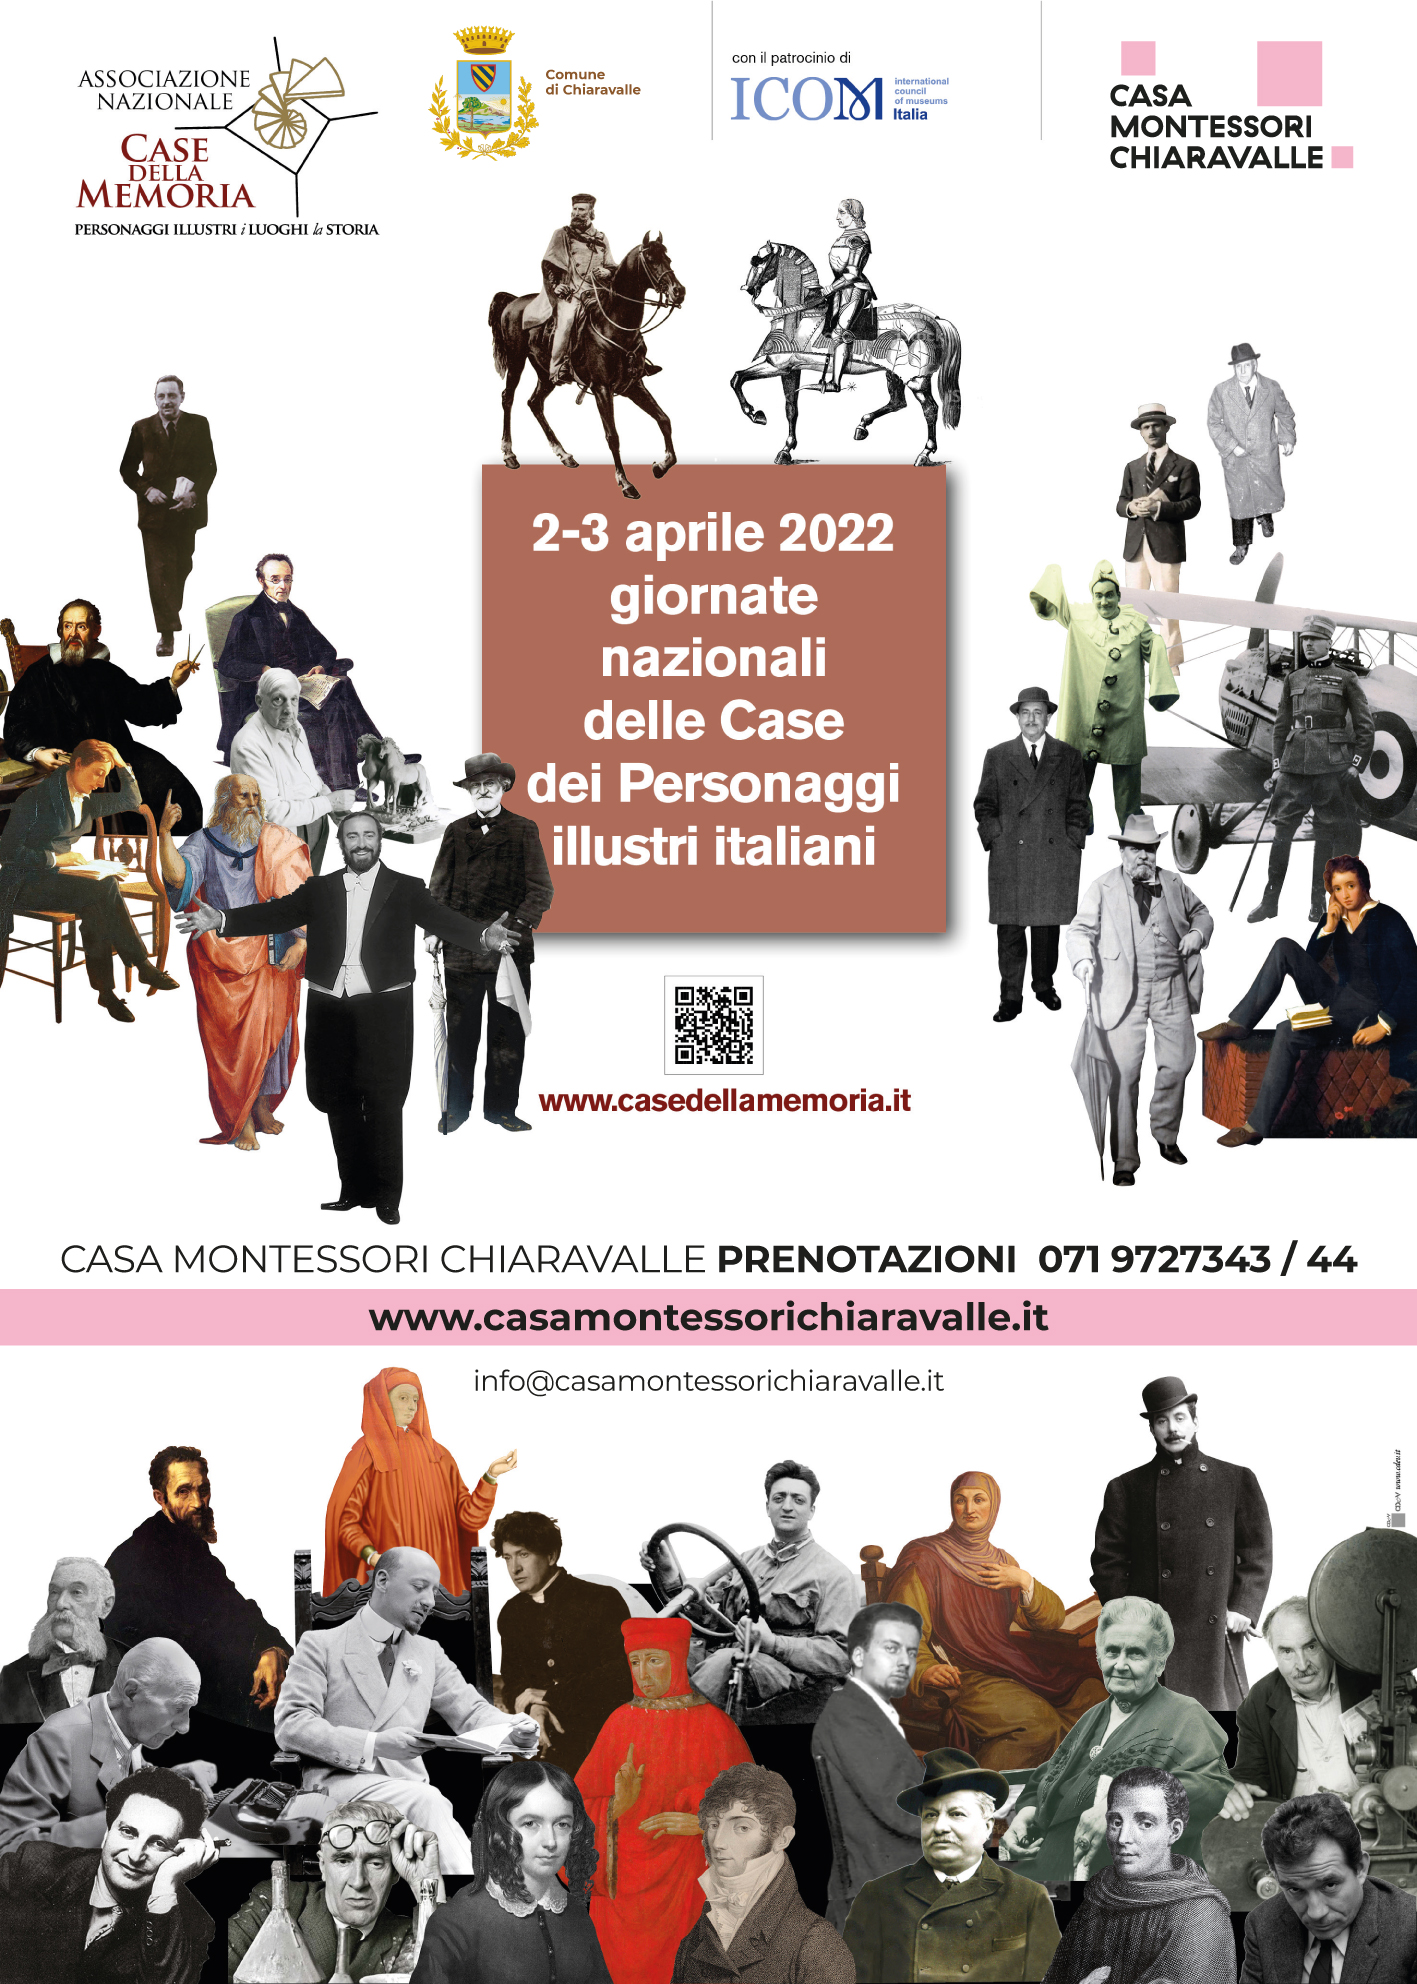 National day of the houses of Italian illustrious personalities (2-3 April)